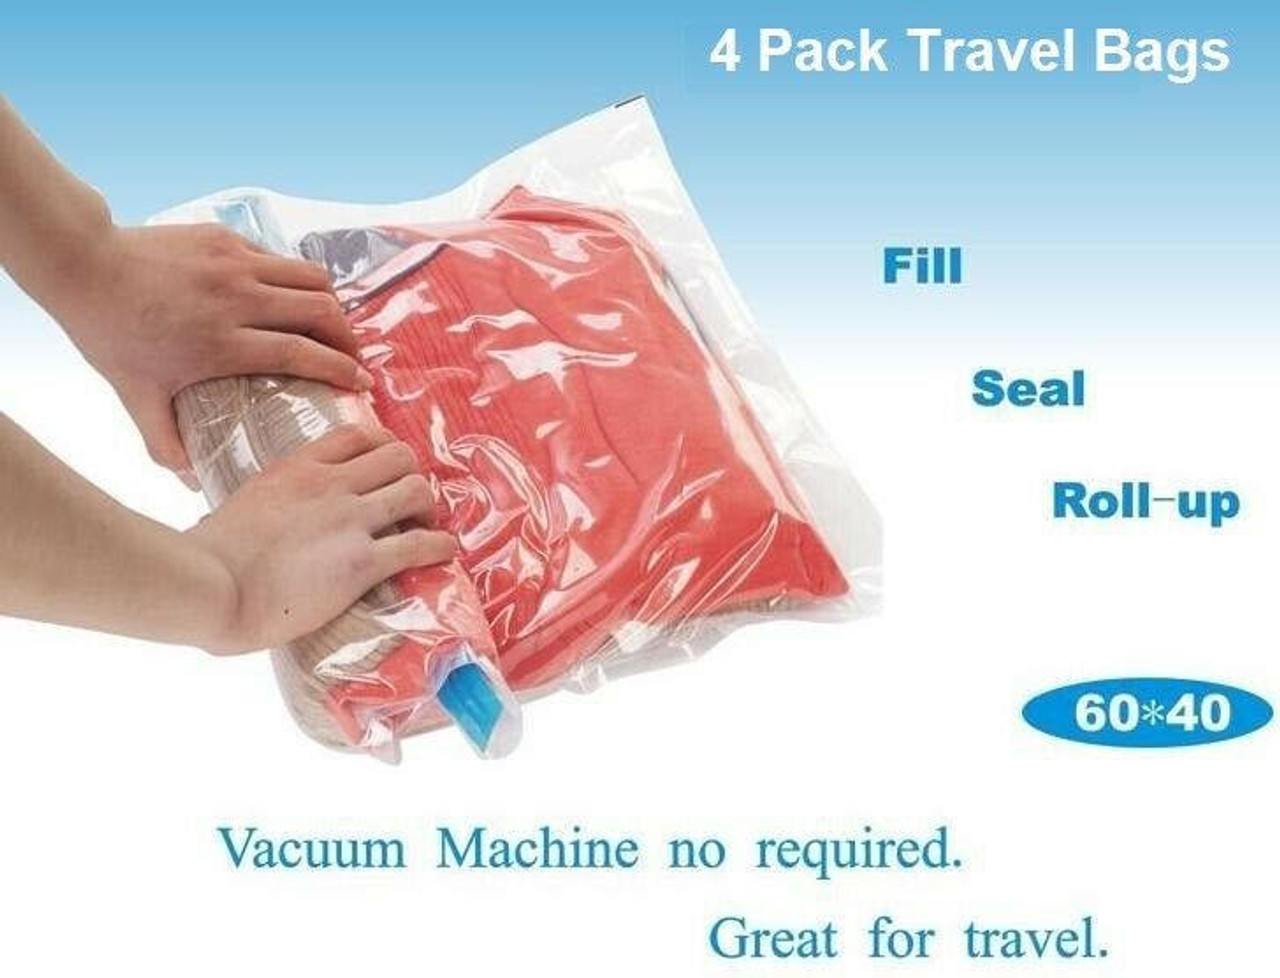 https://cdn11.bigcommerce.com/s-zrh8tkpr8d/images/stencil/1280x1280/products/9979/31594/10-pack-6-super-jumbo-xl-largest-vacuum-space-saver-storage-bag-4-travel-bags__44068.1689534177.jpg?c=2&imbypass=on